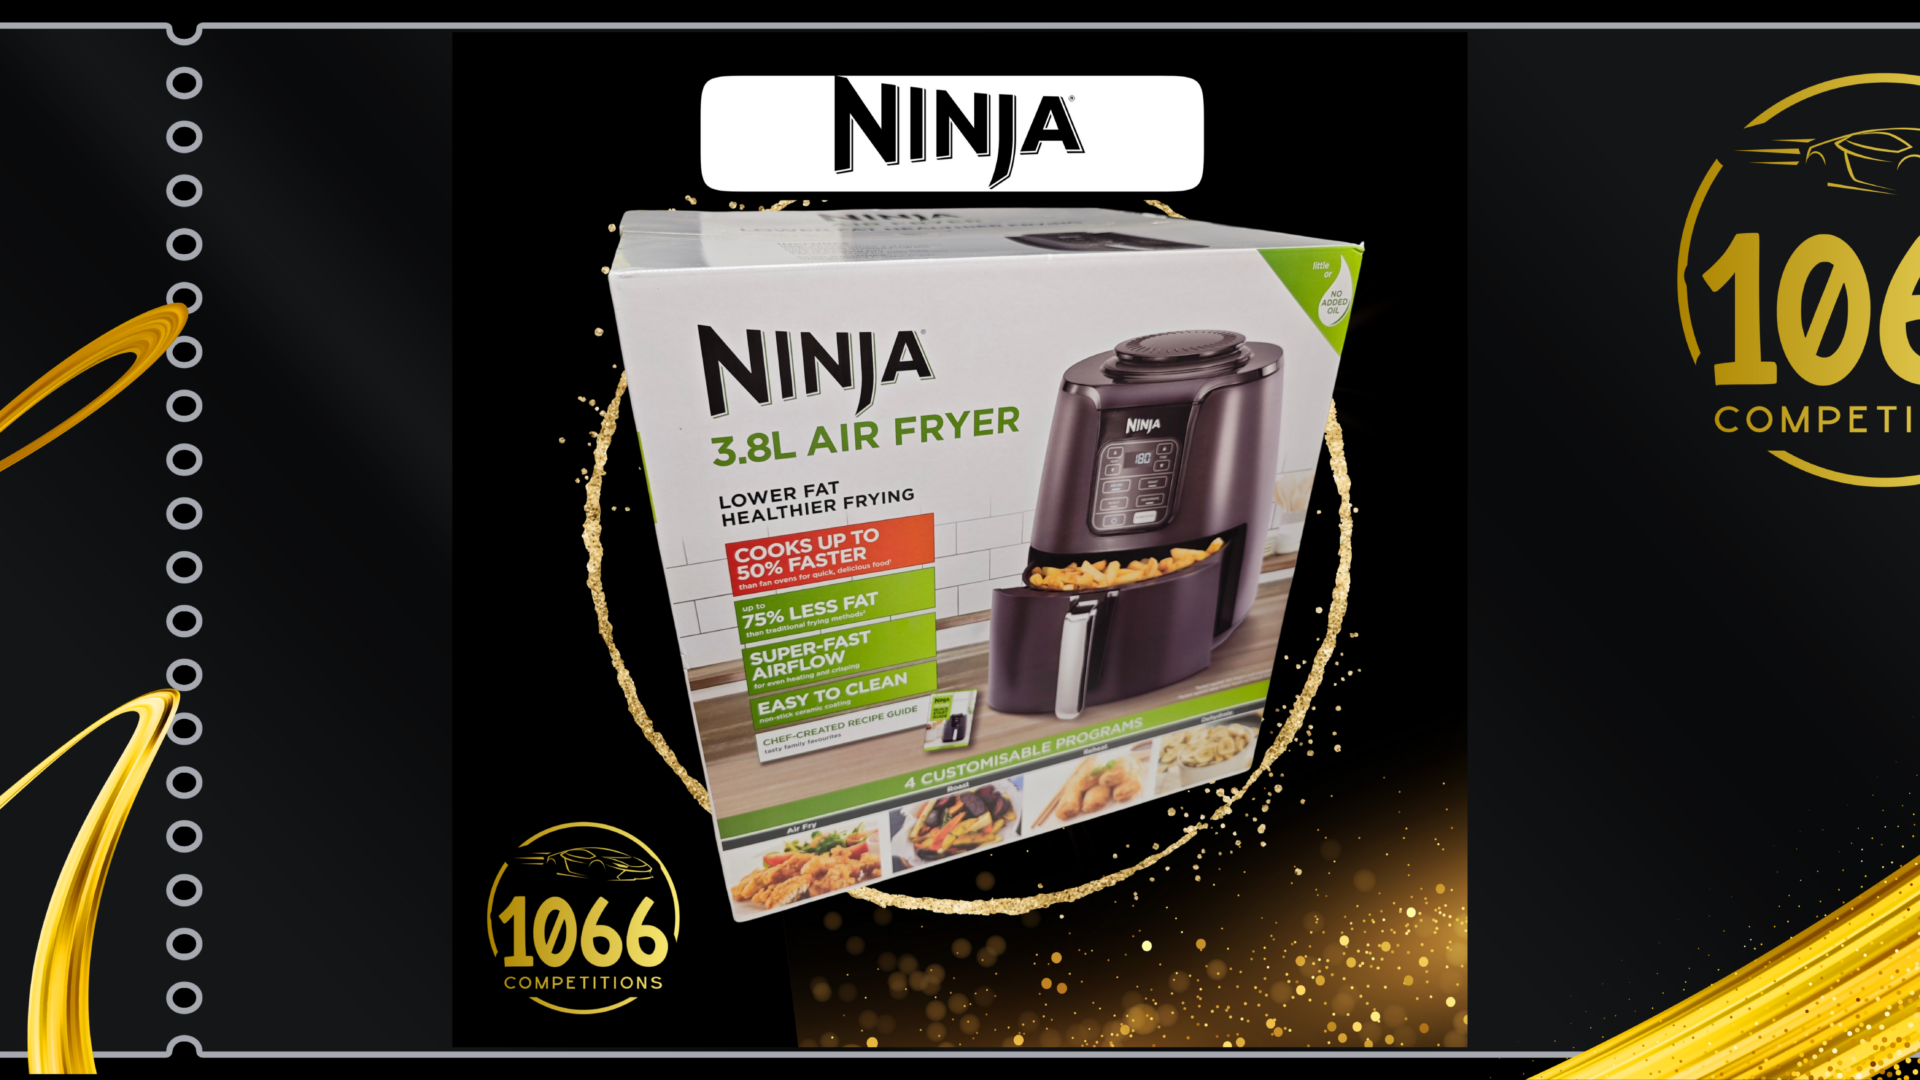 Win a Ninja Air Fryer or Cash Alternative at 1066 Competitions